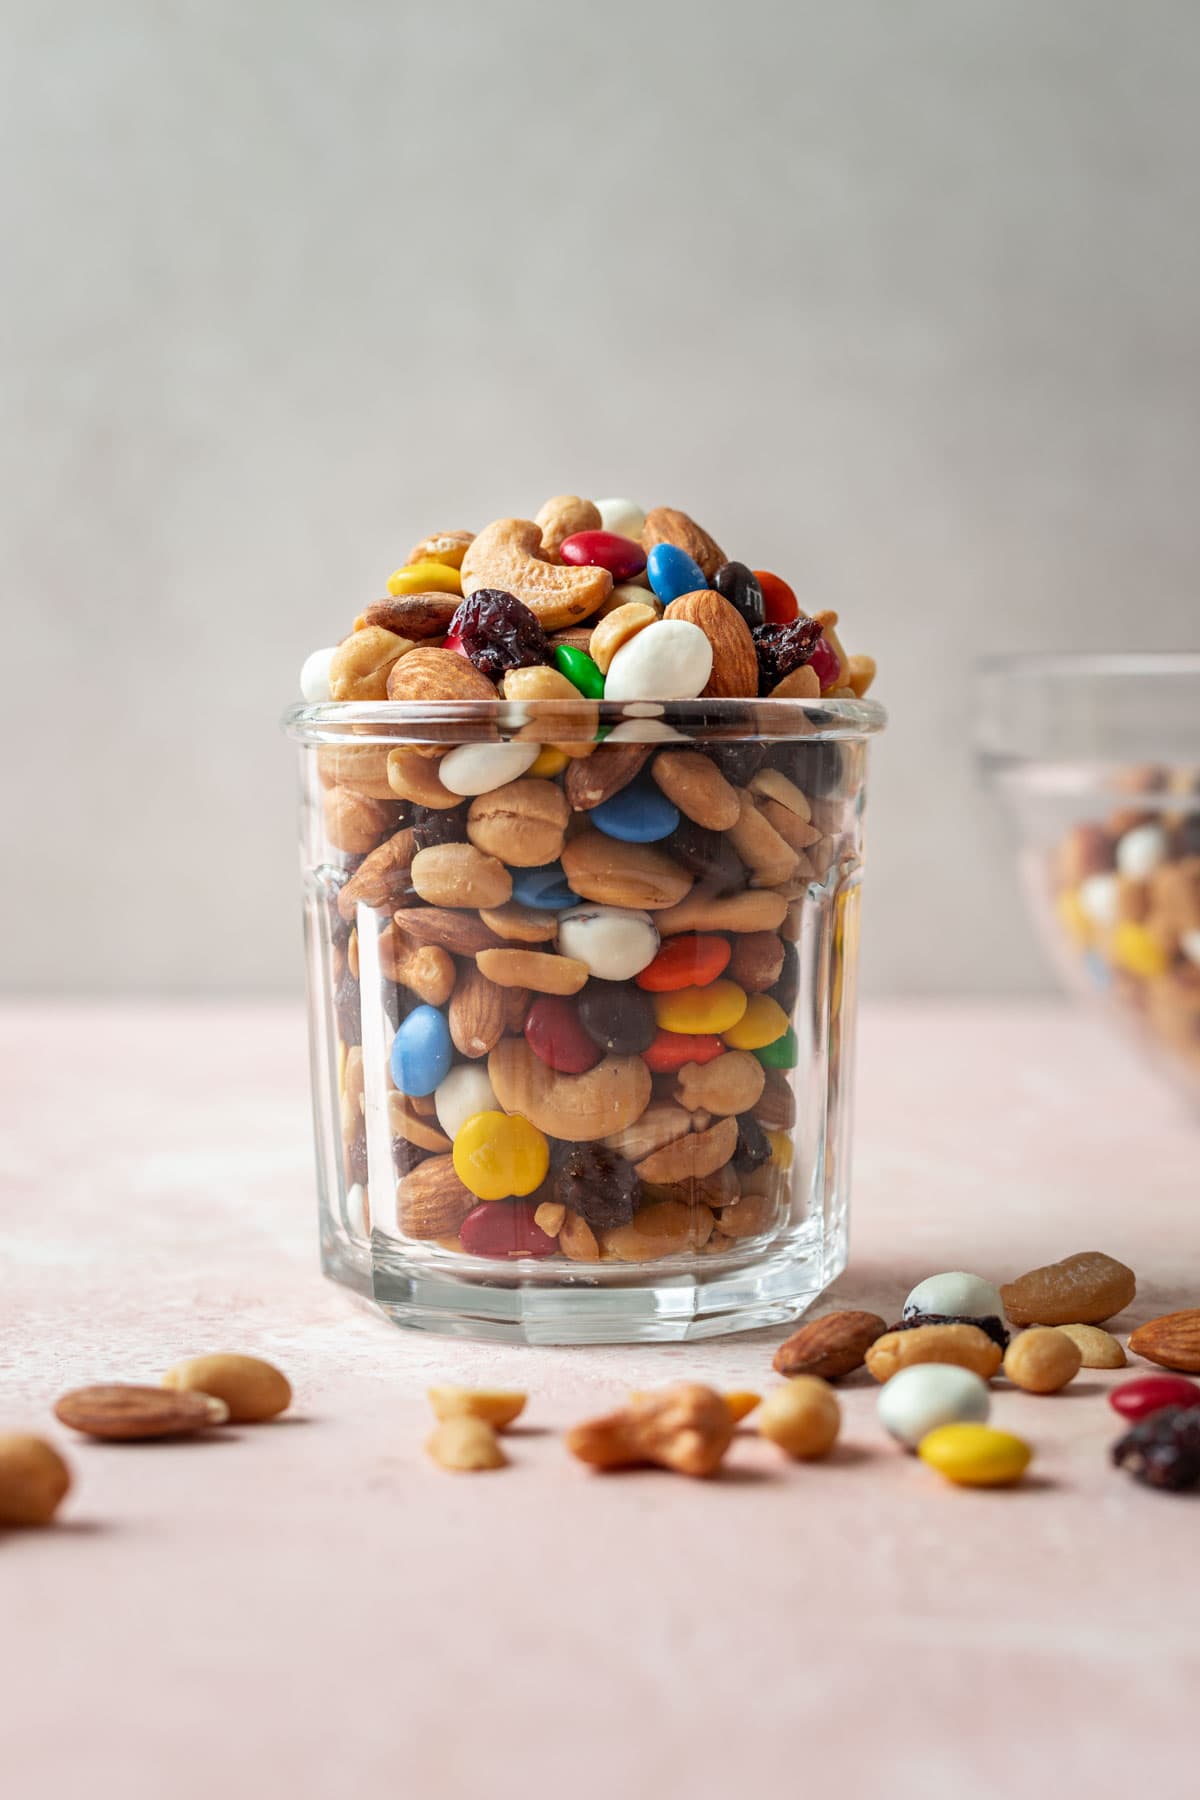 Classic Trail Mix combined in glass jar with some mix sprinkled around base, side view